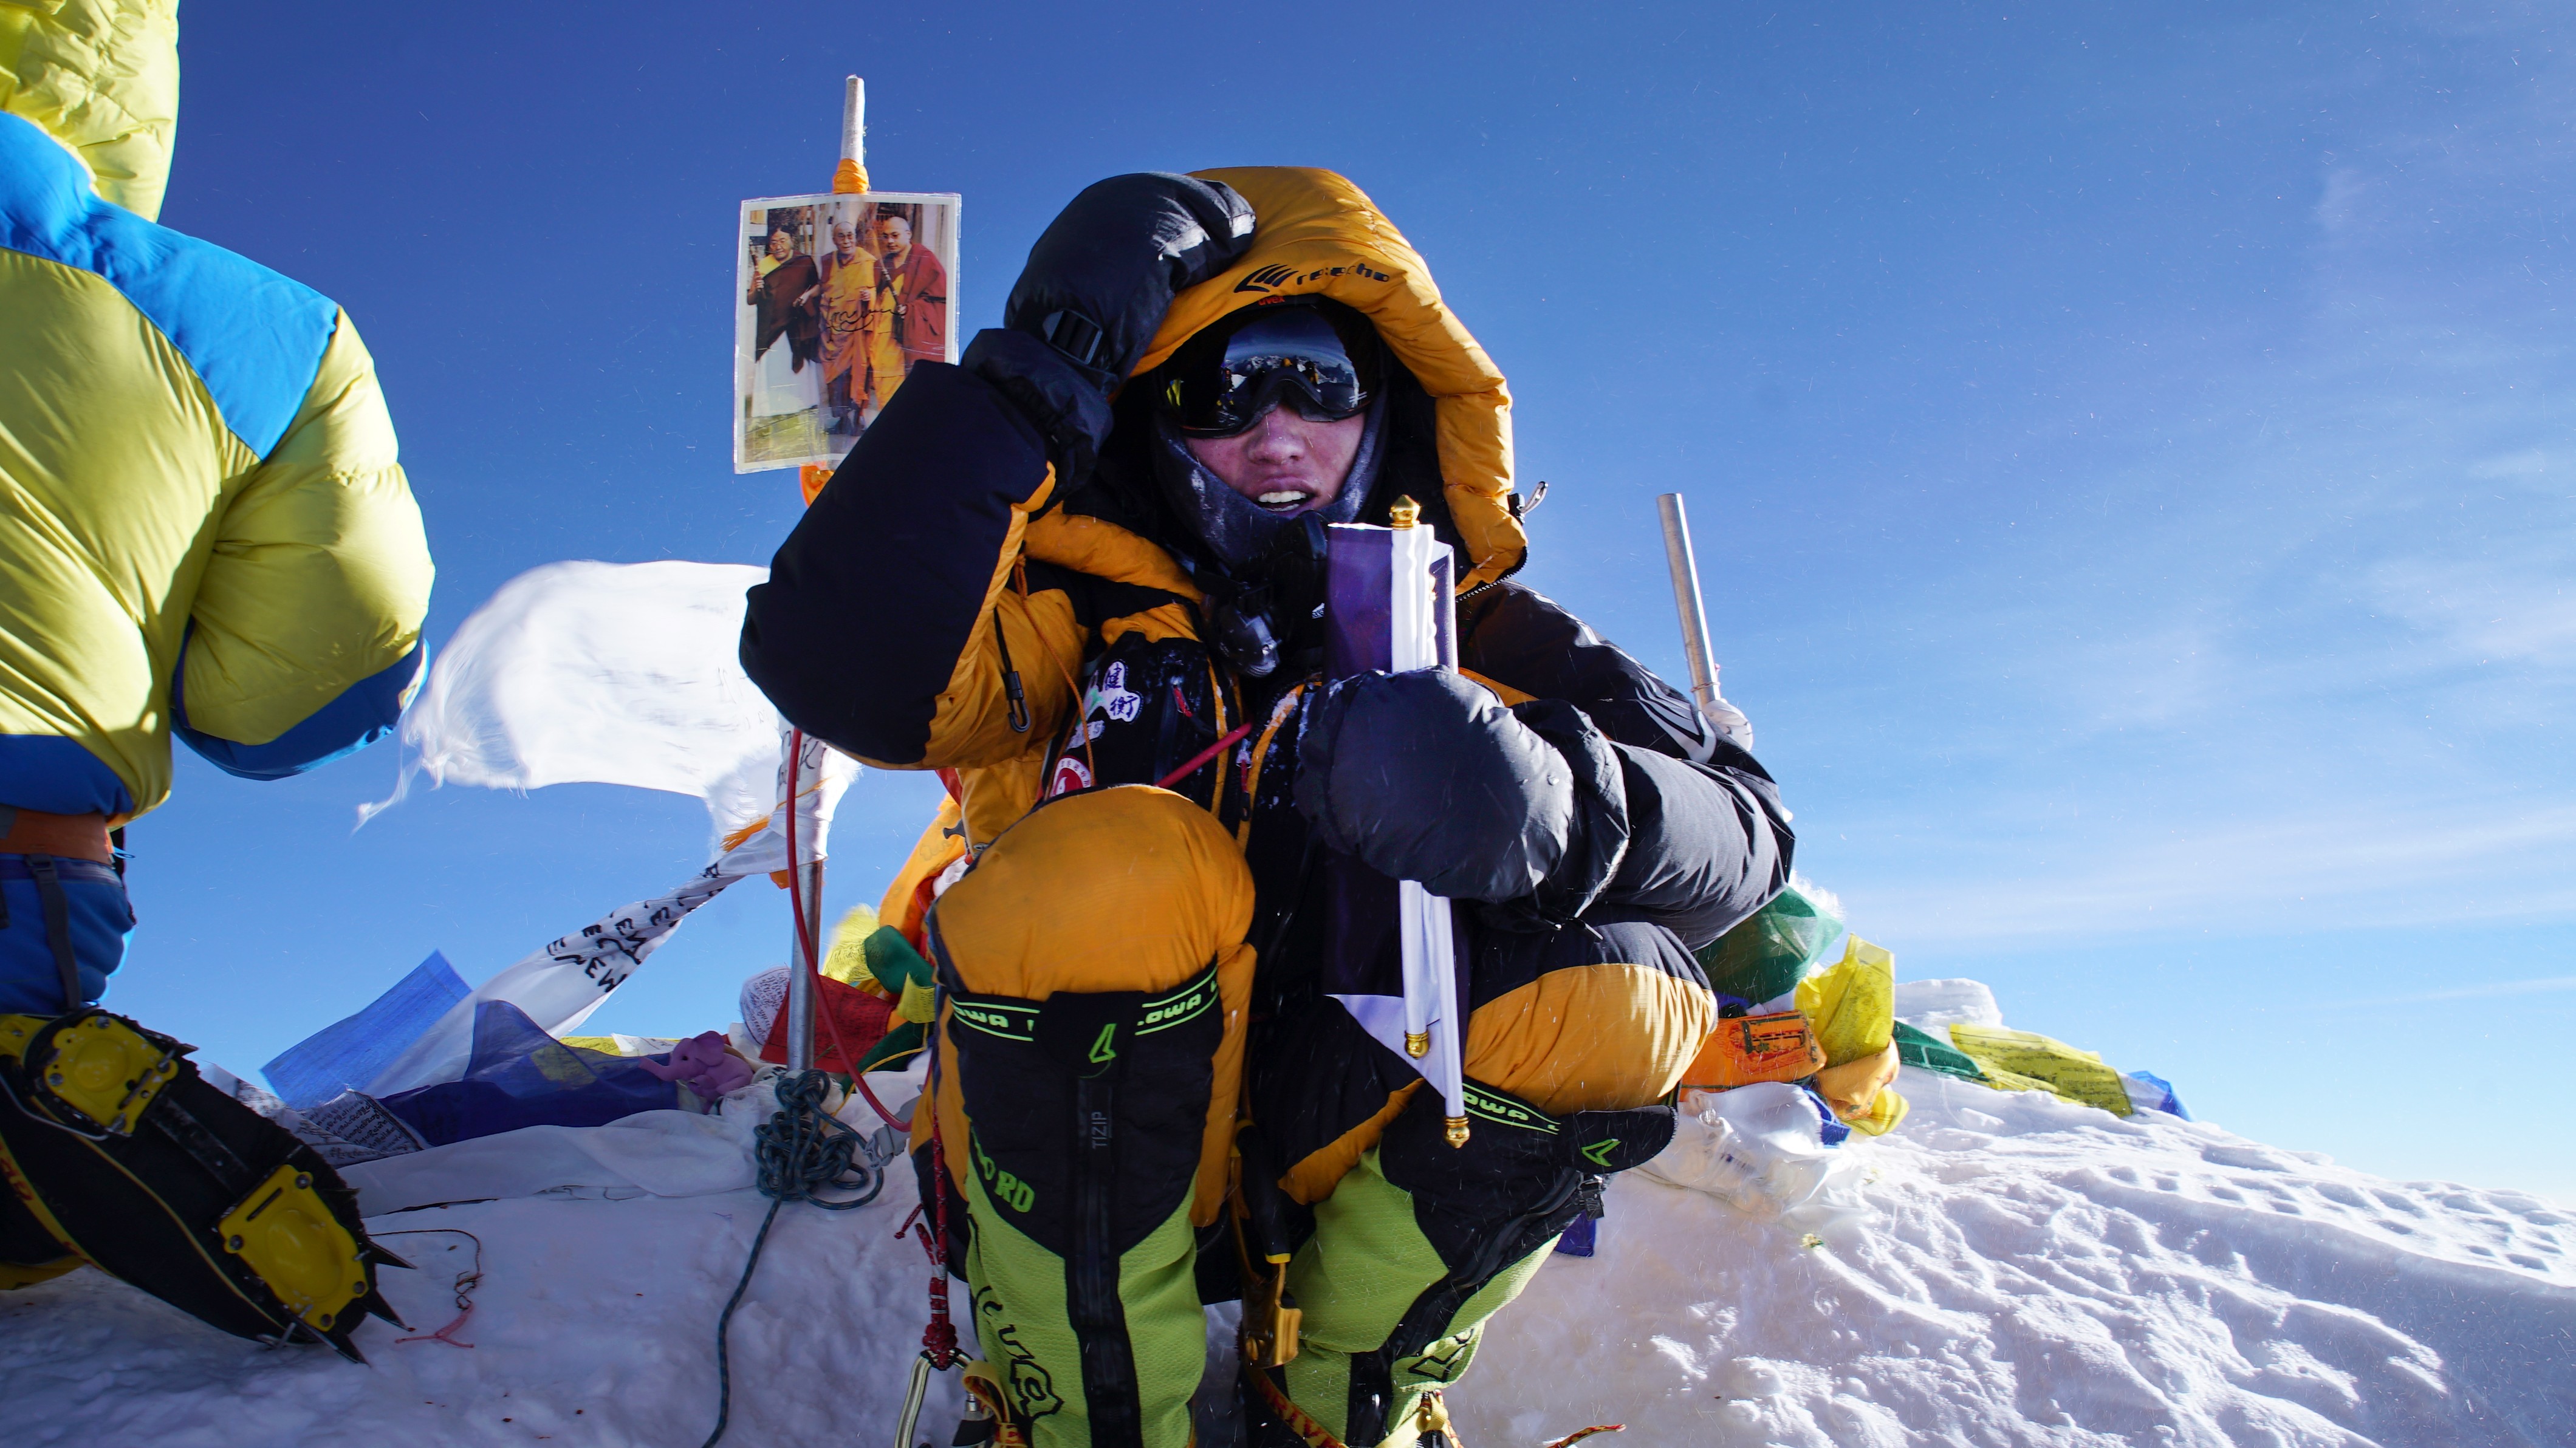 The moment that Elton Ng summit Everest. Ng, a physiotherapist, become the seventh Hong Kong people that has successfully scaled Mount Everest.